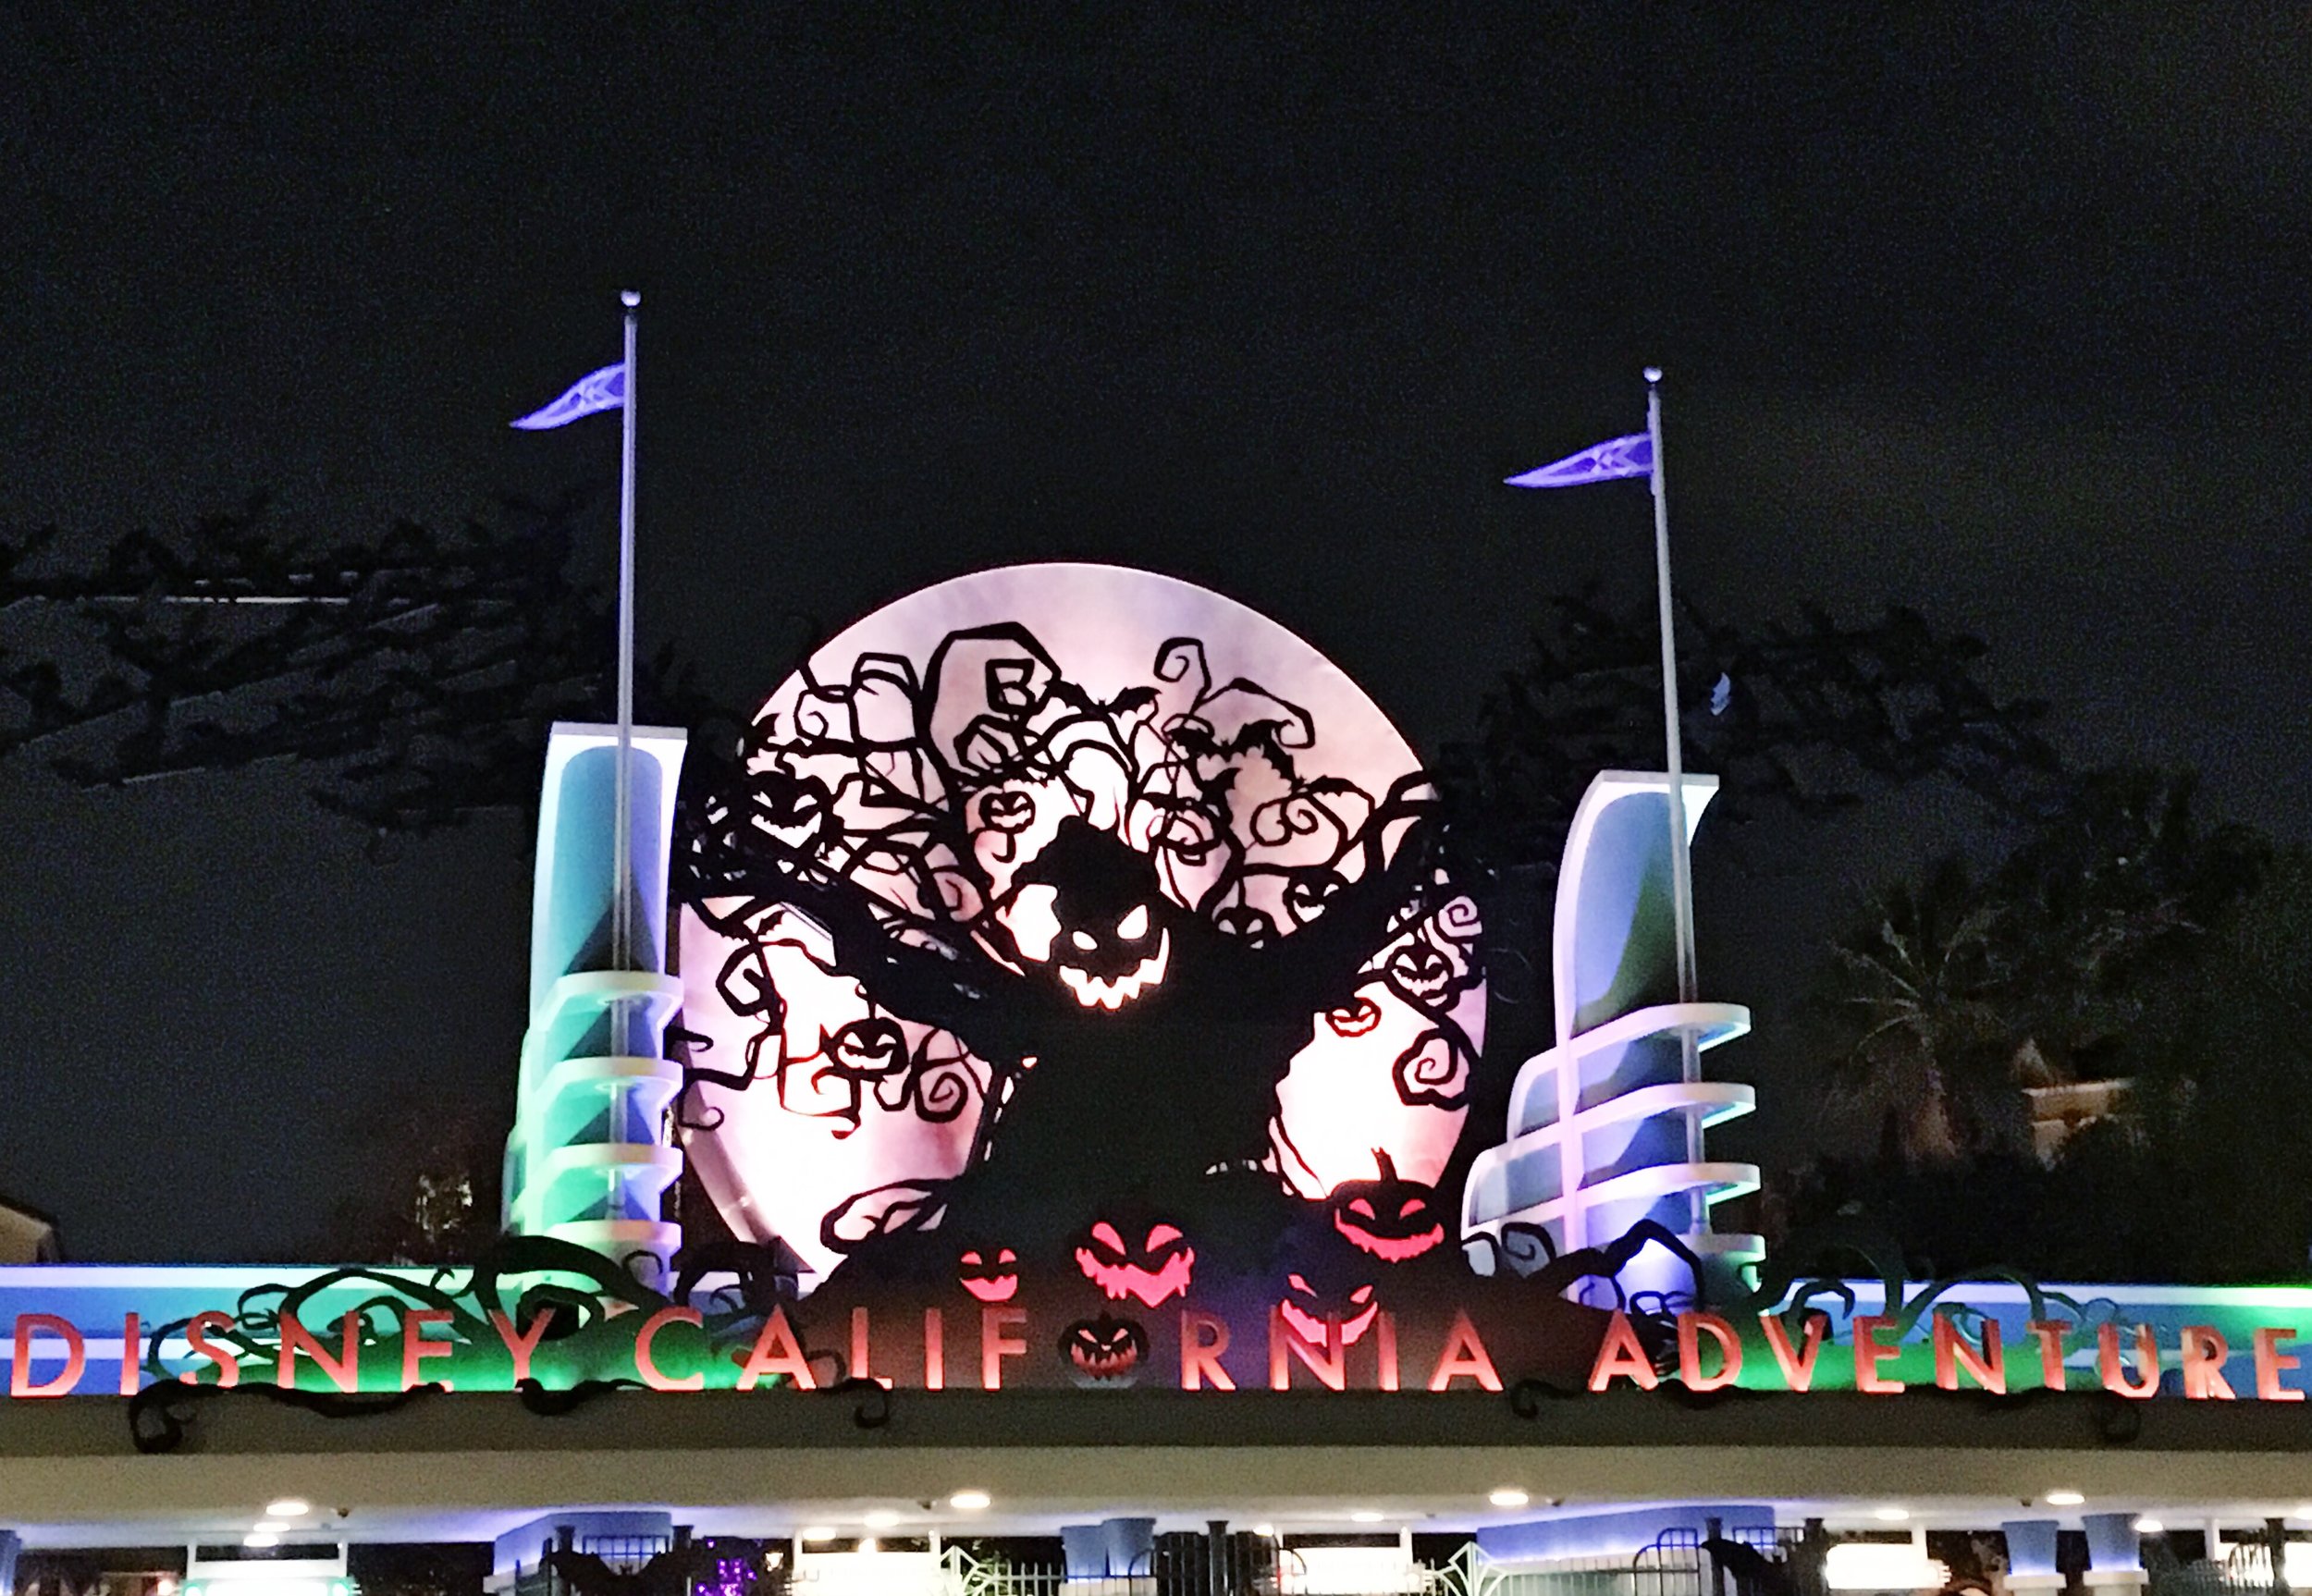 The Disney California Adventure Park featured a giant-sized Oogie-Boogie who has arrived to cast a spell on the Park.